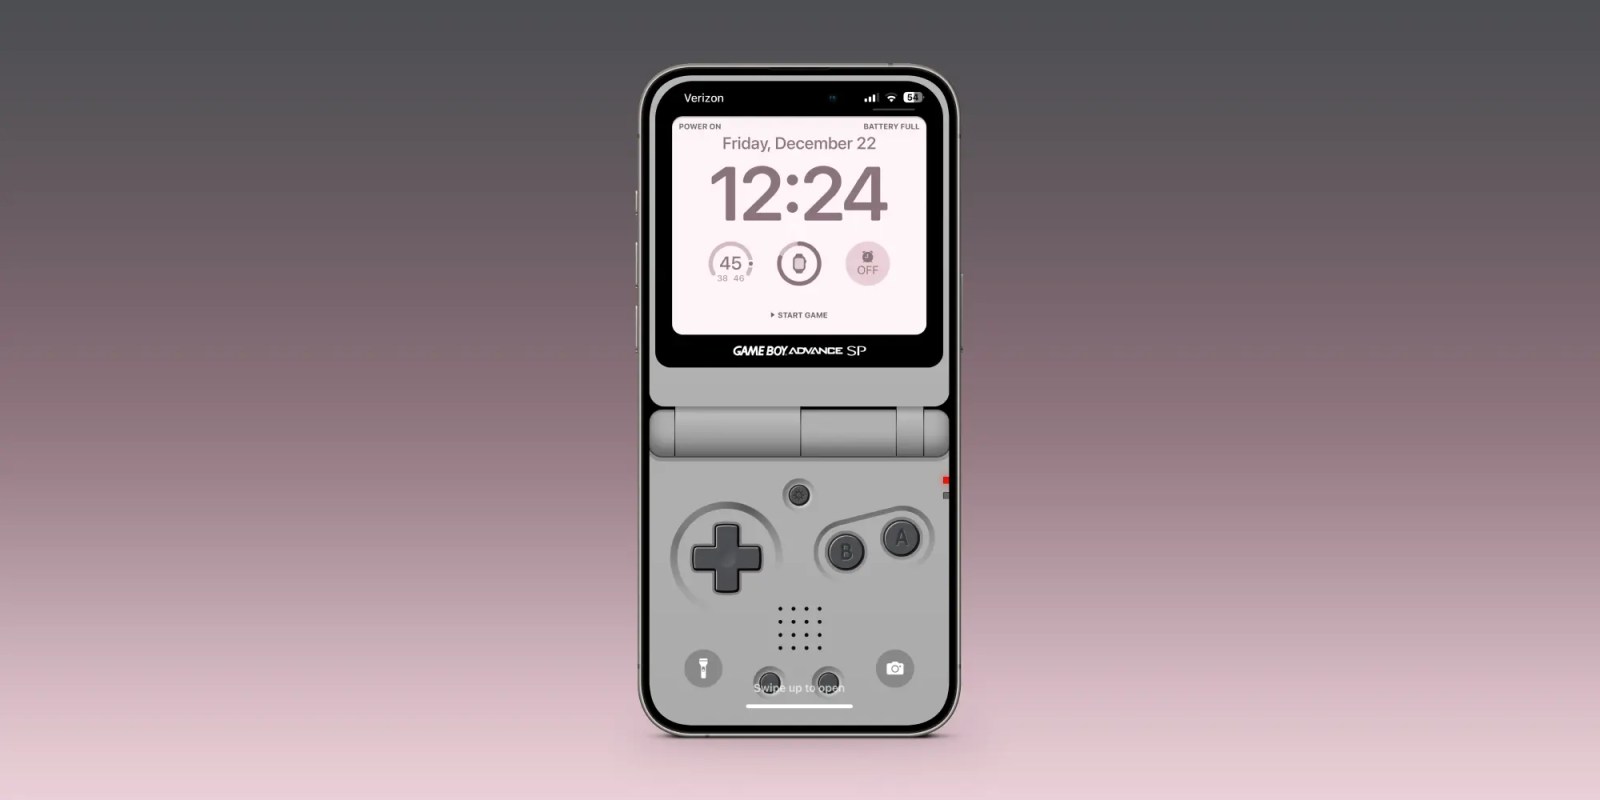 Game Boy wallpaper for iPhone